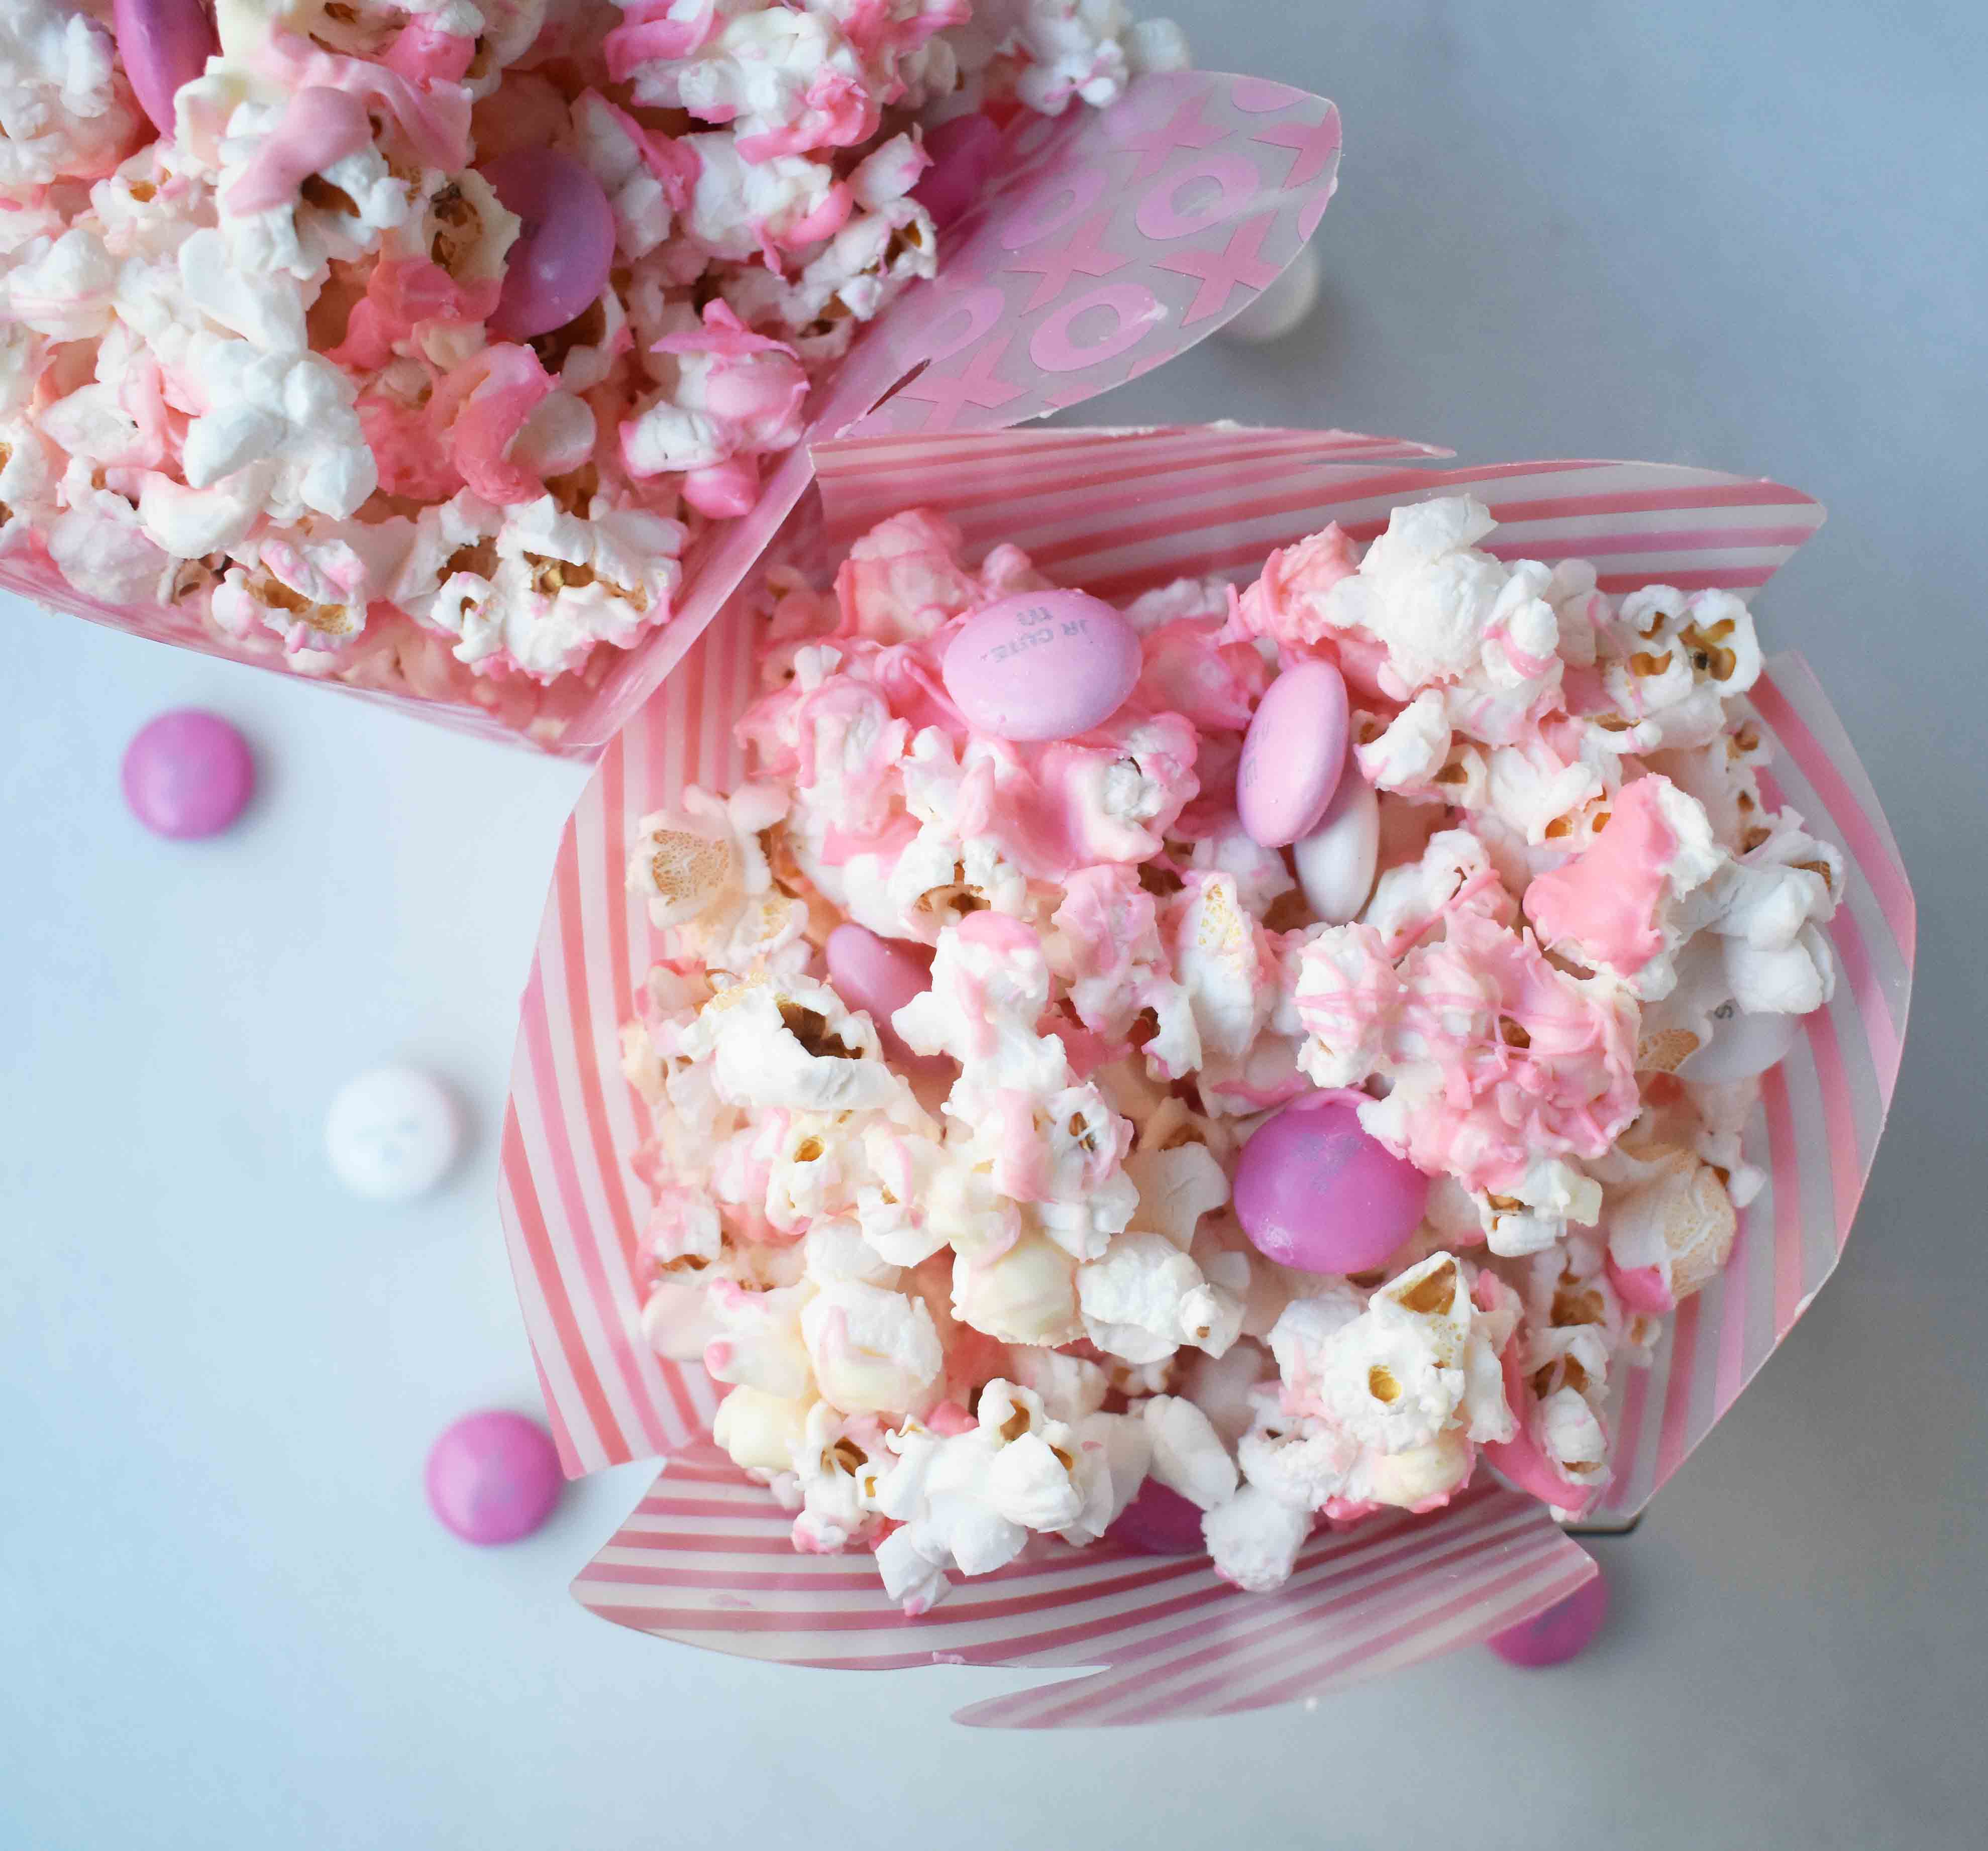 Valentine's White Chocolate M & M Popcorn. Salted popcorn drizzled with Ghirardelli white chocolate and M & M's. A perfect salty sweet treat. www.modernhoney.com